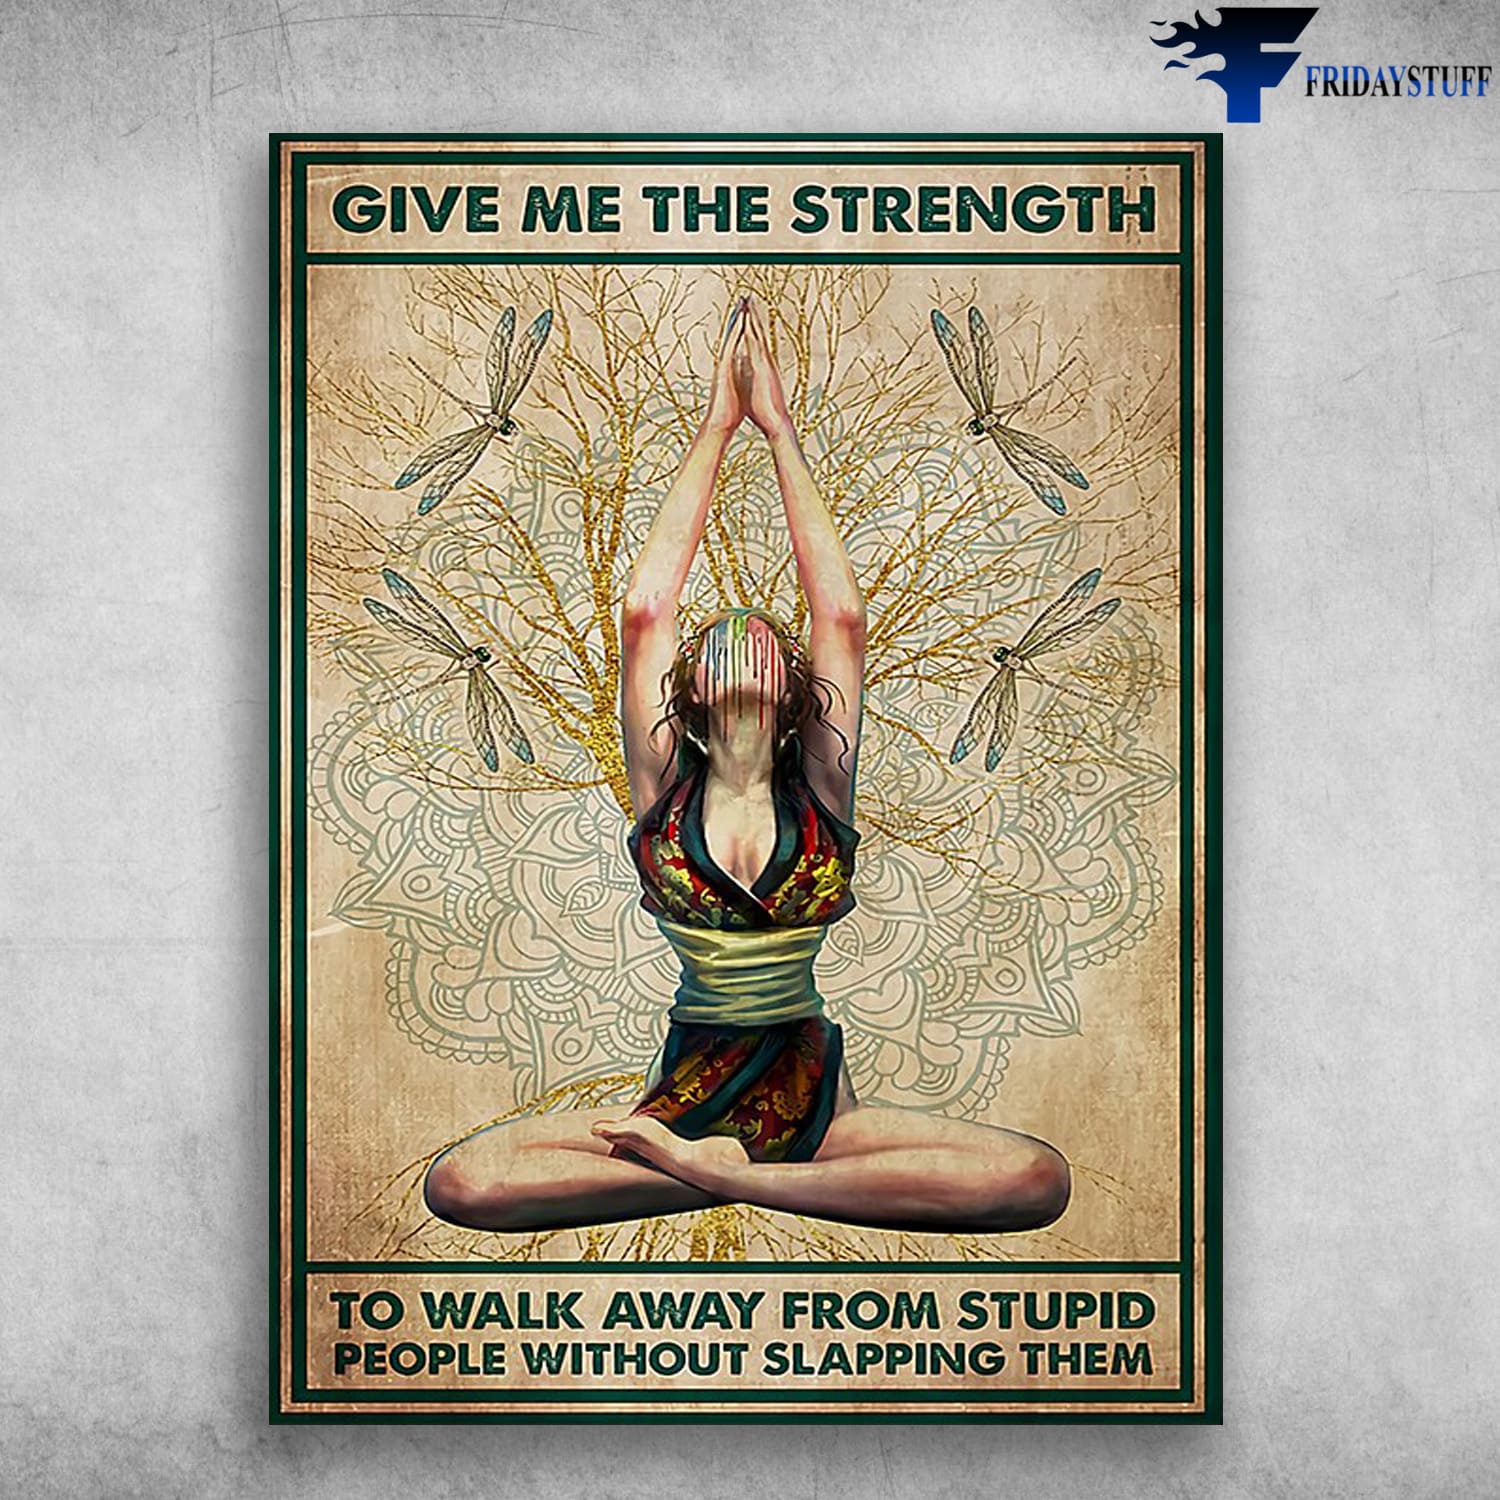 Yoga Girl, Yoga Lover, Give Me The Strength, To Walk Aways From Stupid People, Without Slapping Them